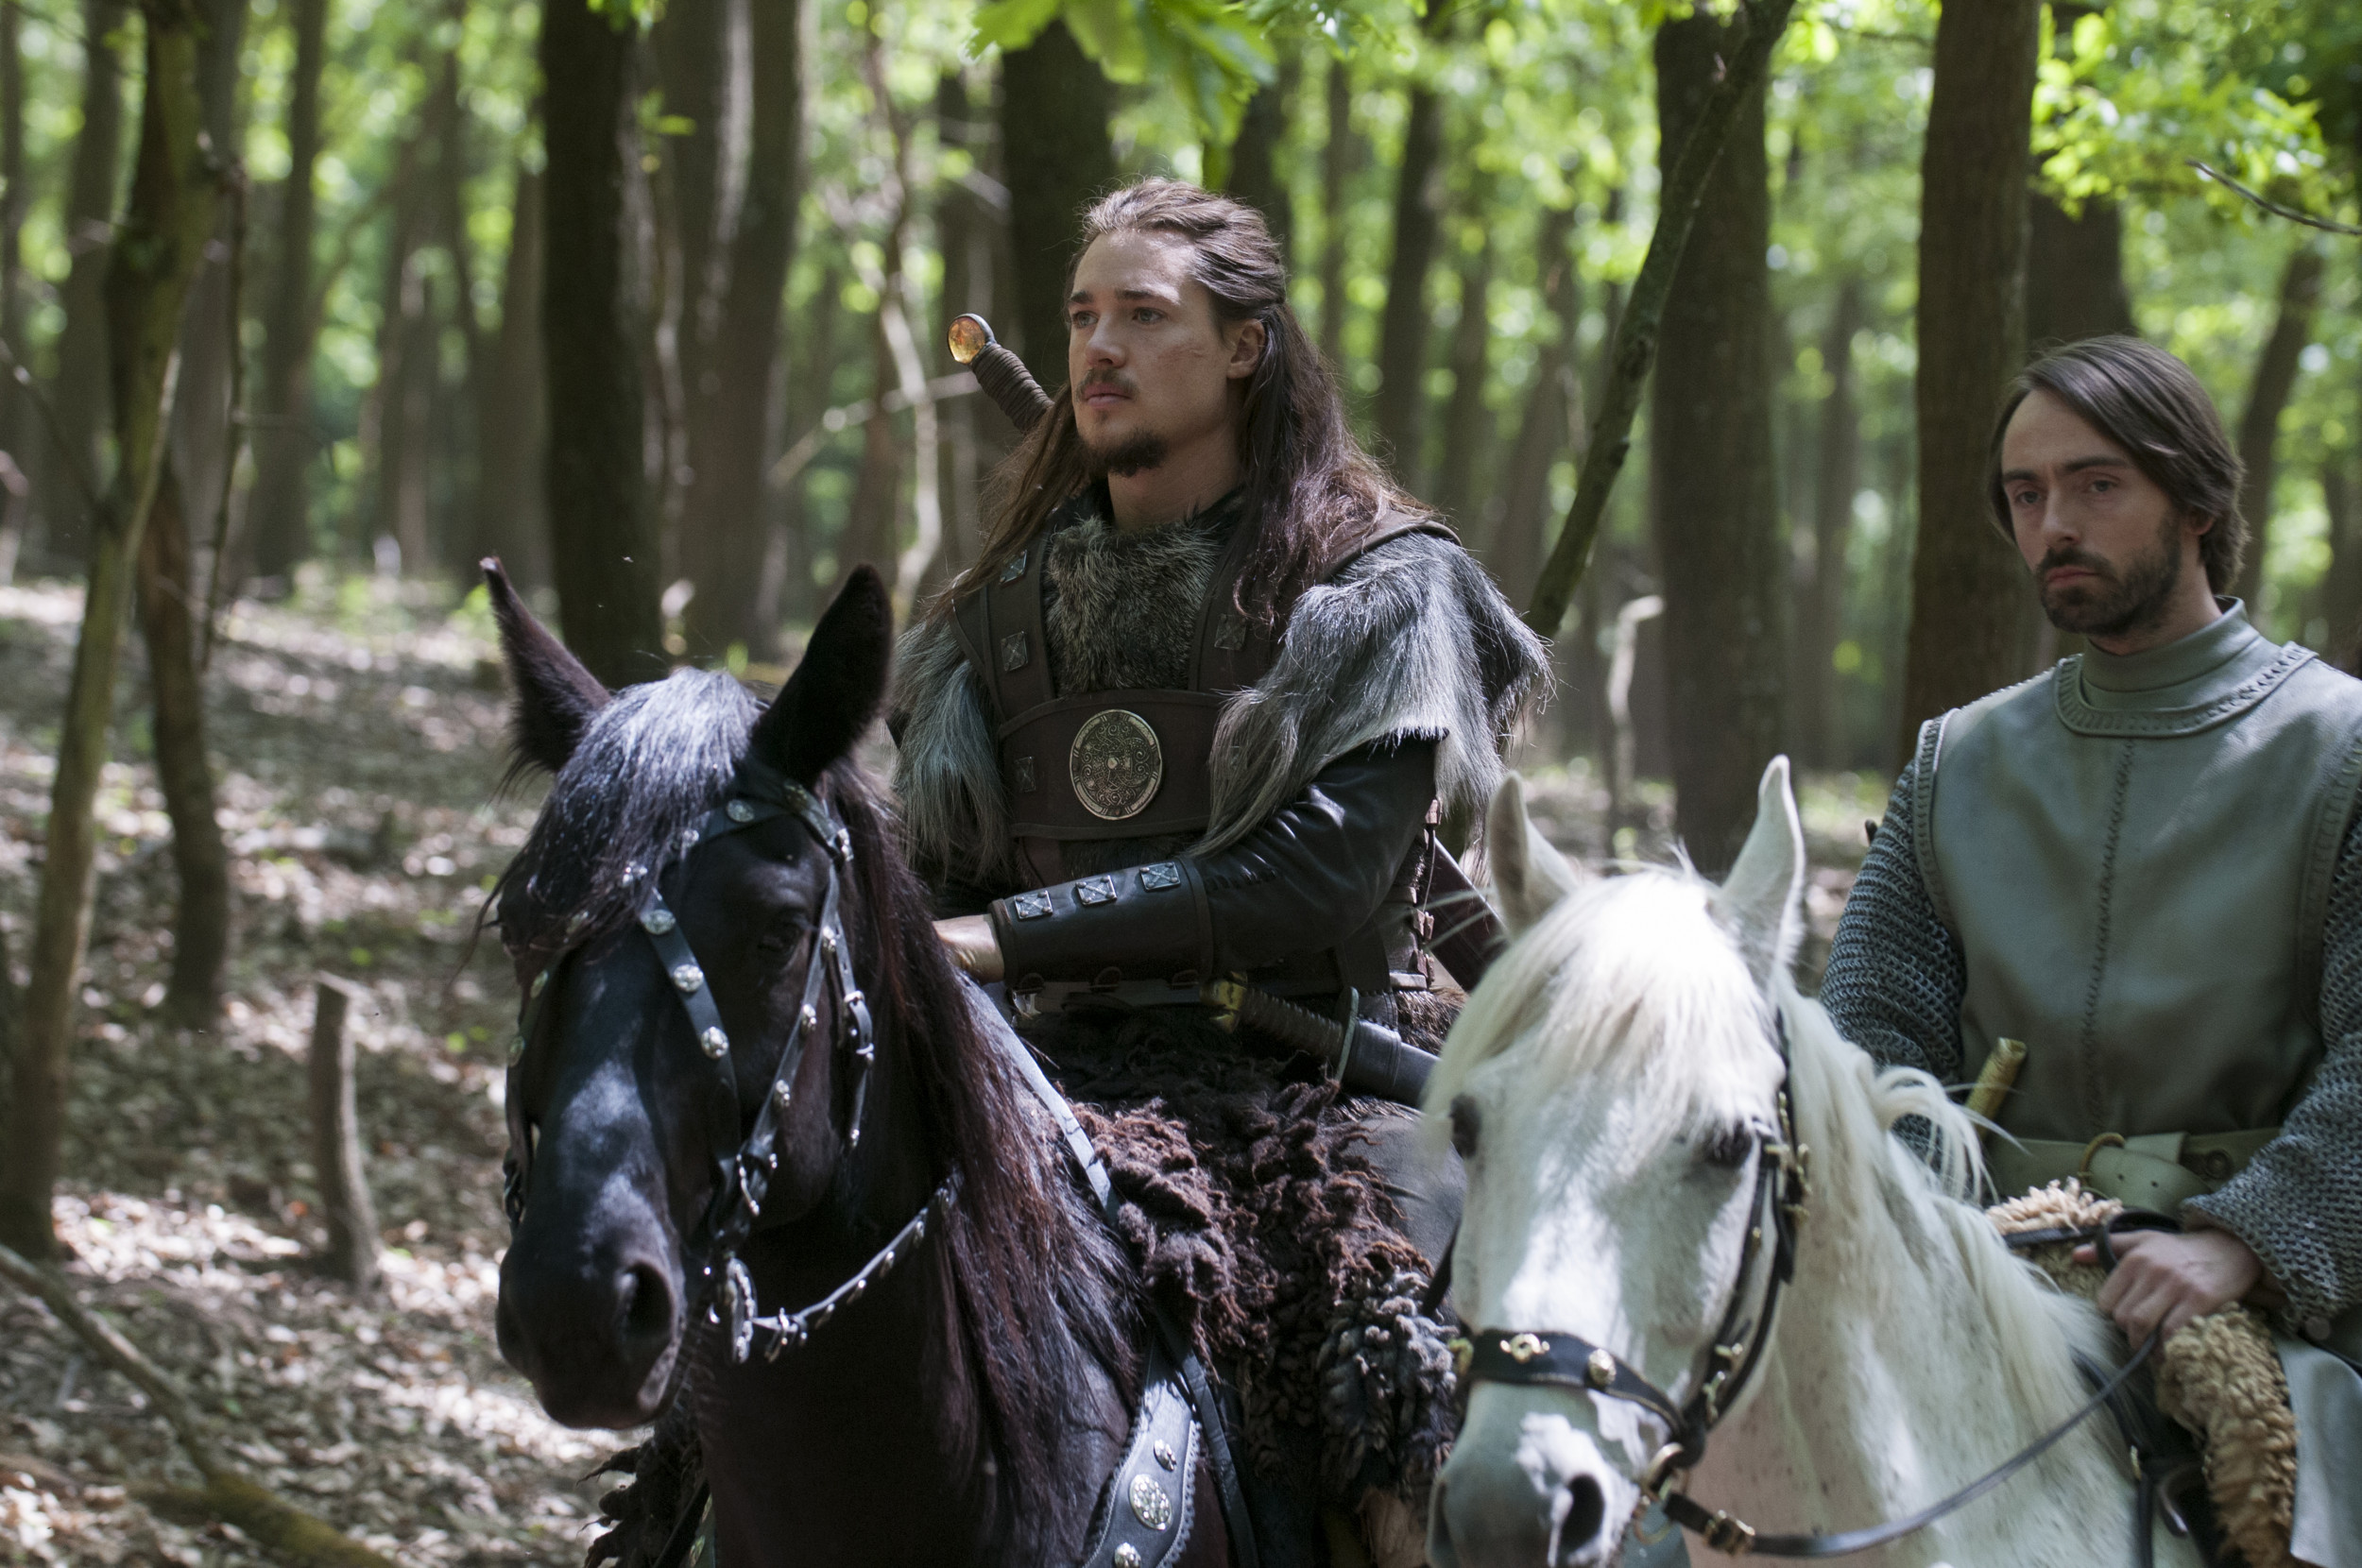 Is Uhtred of Bebbanburg from 'The Last Kingdom' a real historic figure? -  History of England - Quora